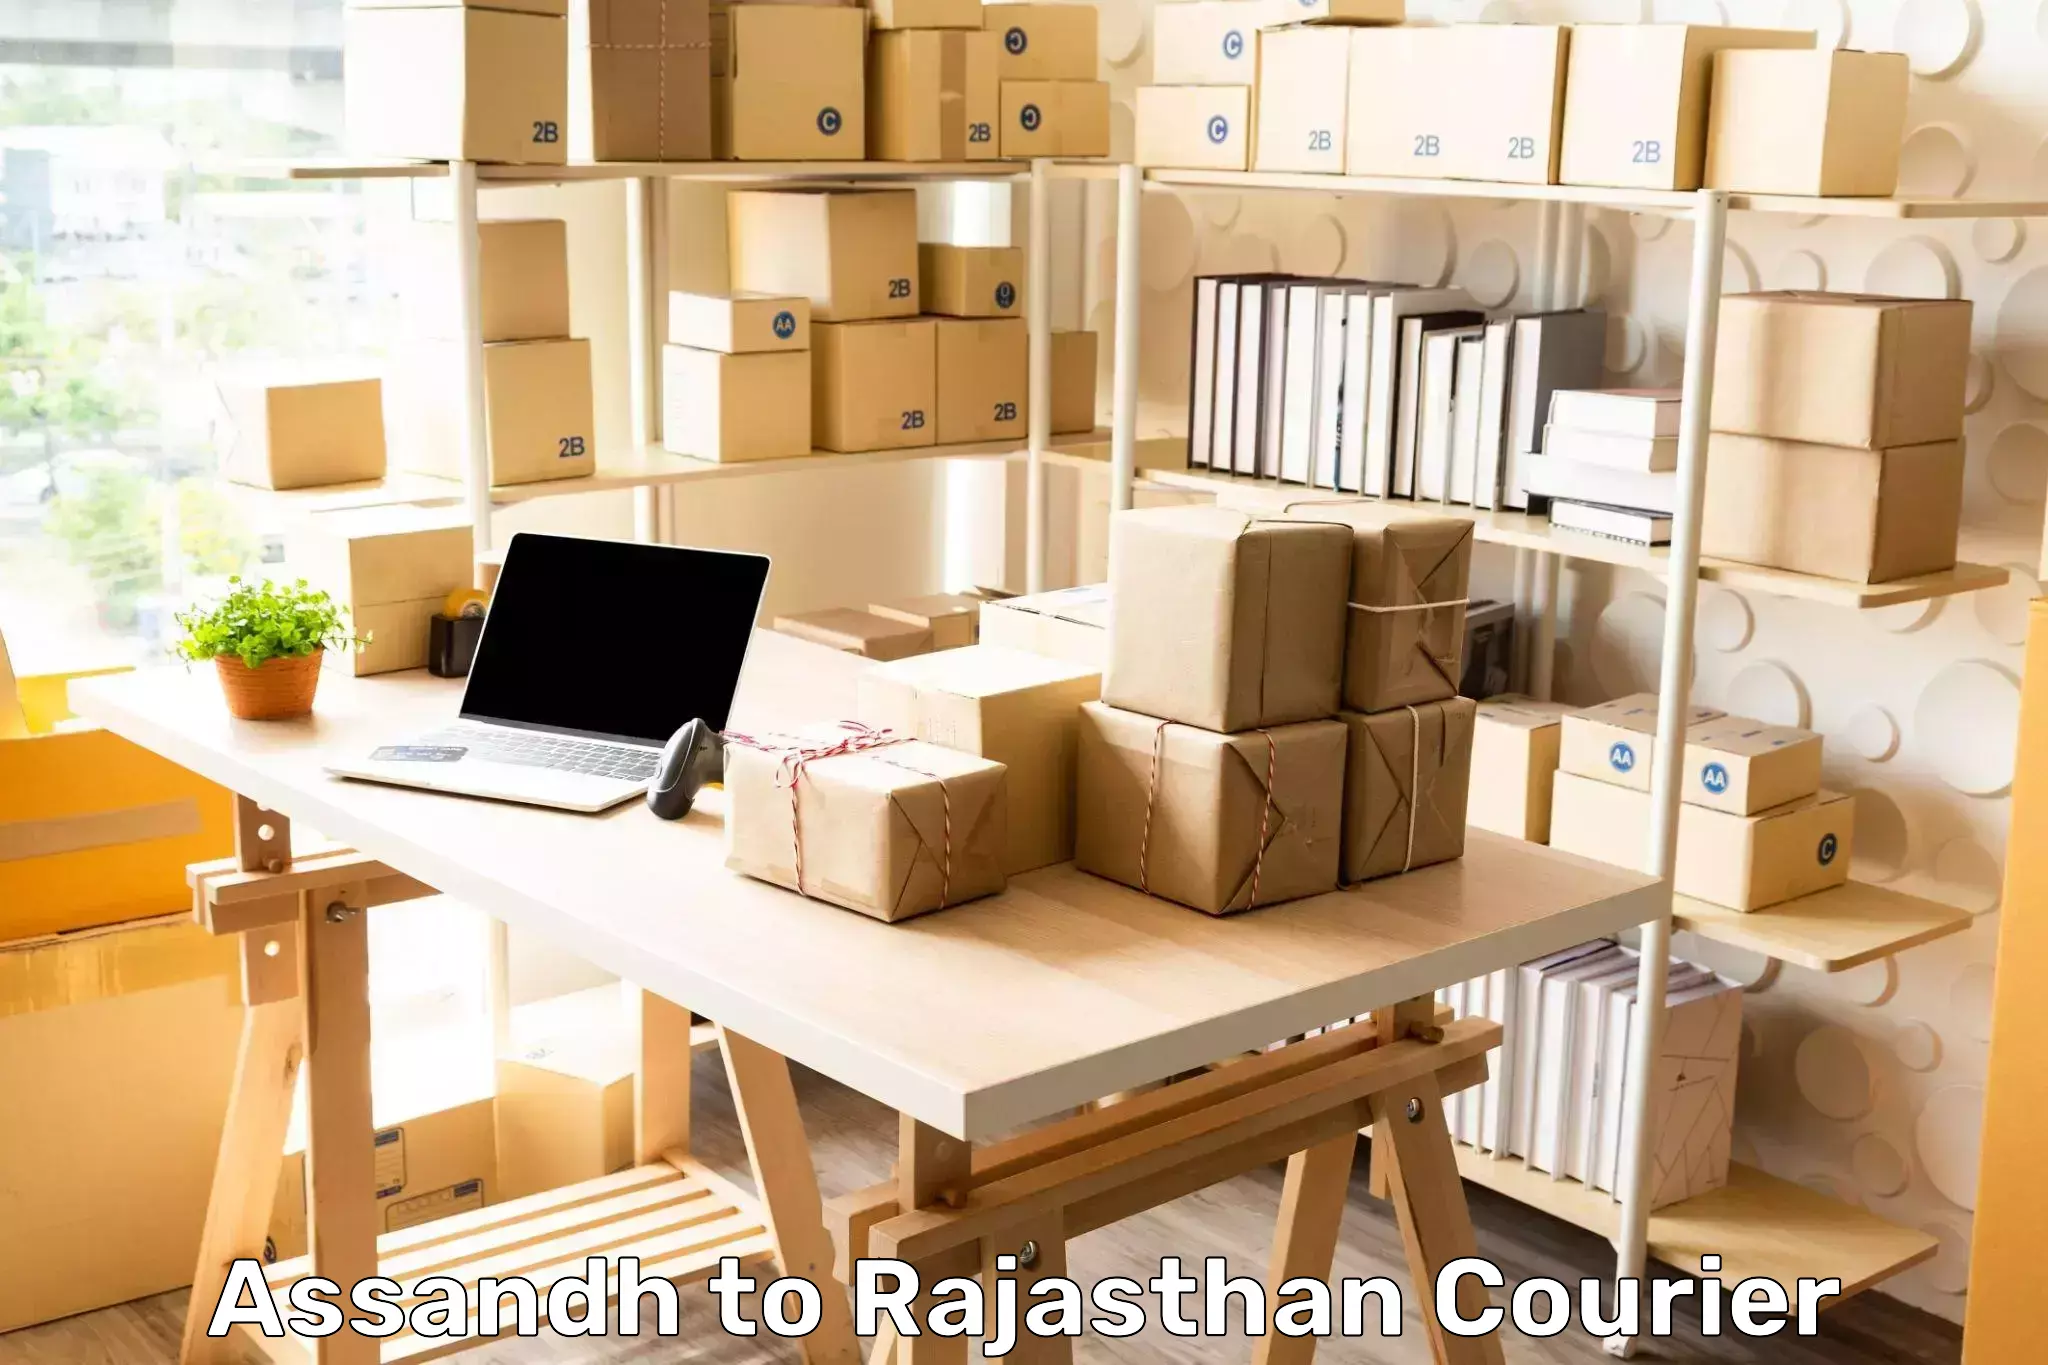 Parcel service for businesses in Assandh to Yeswanthapur